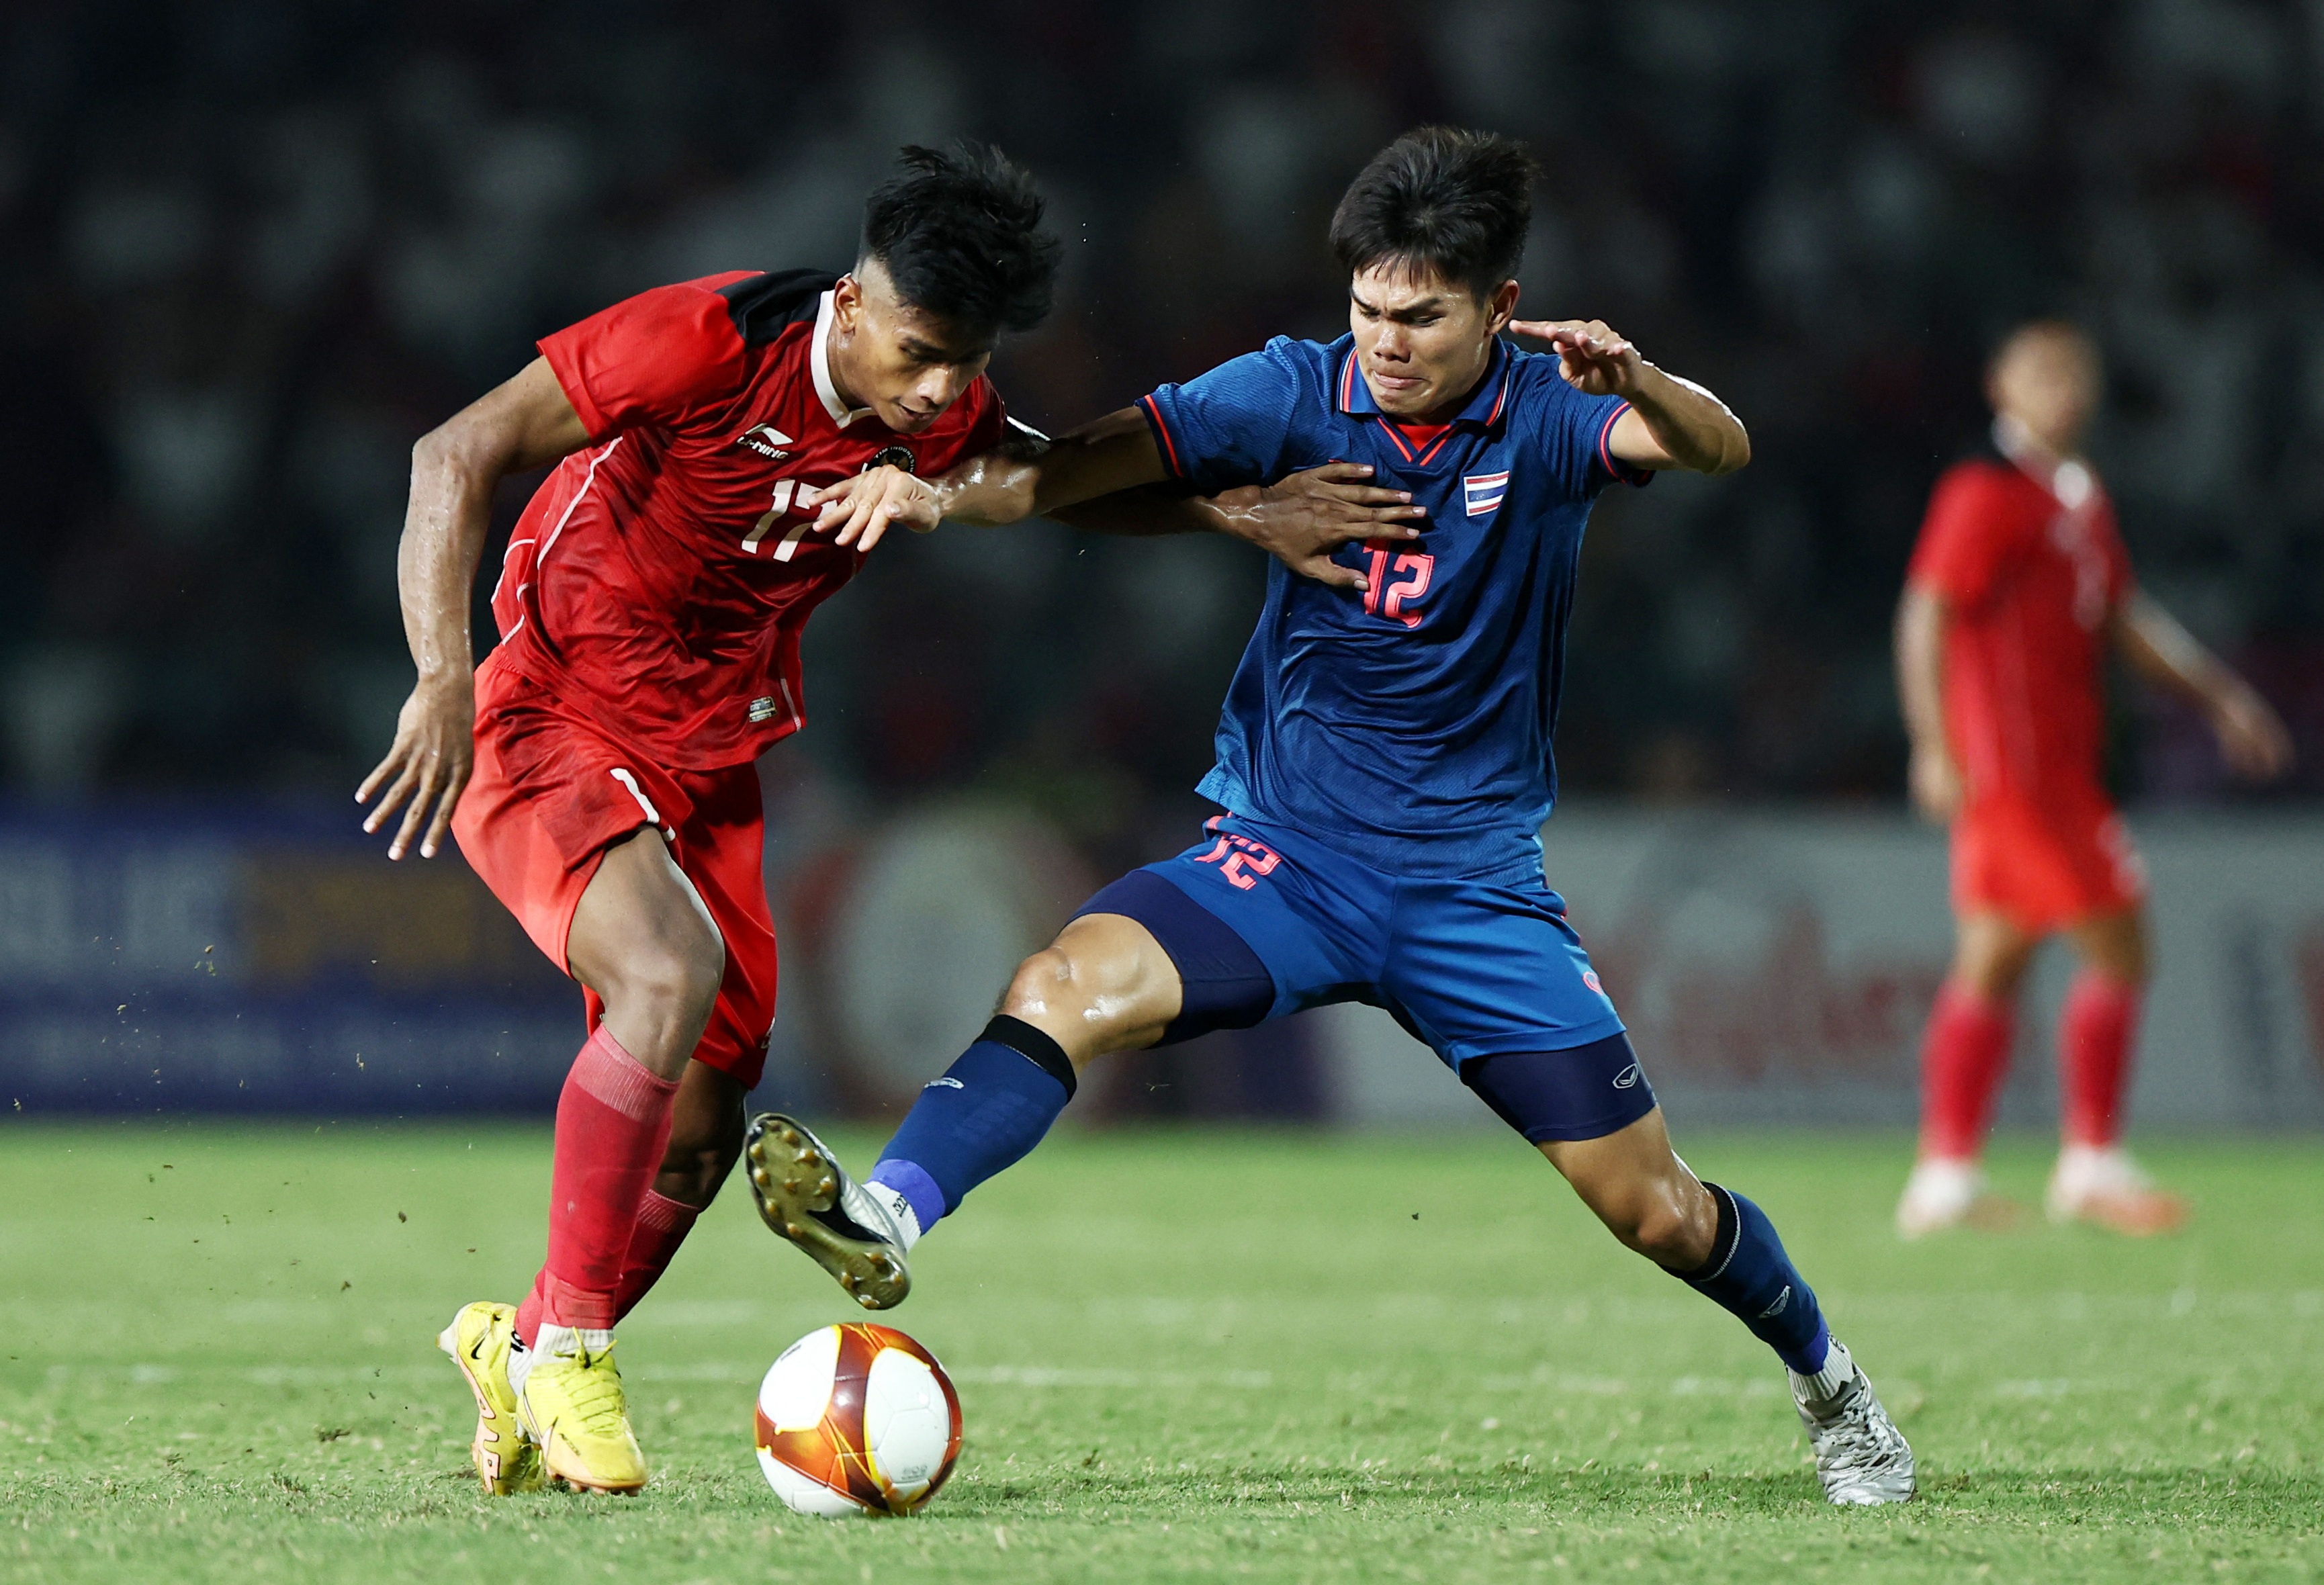 Where can we watch the UEFA Champions League play-offs in Southeast Asia?